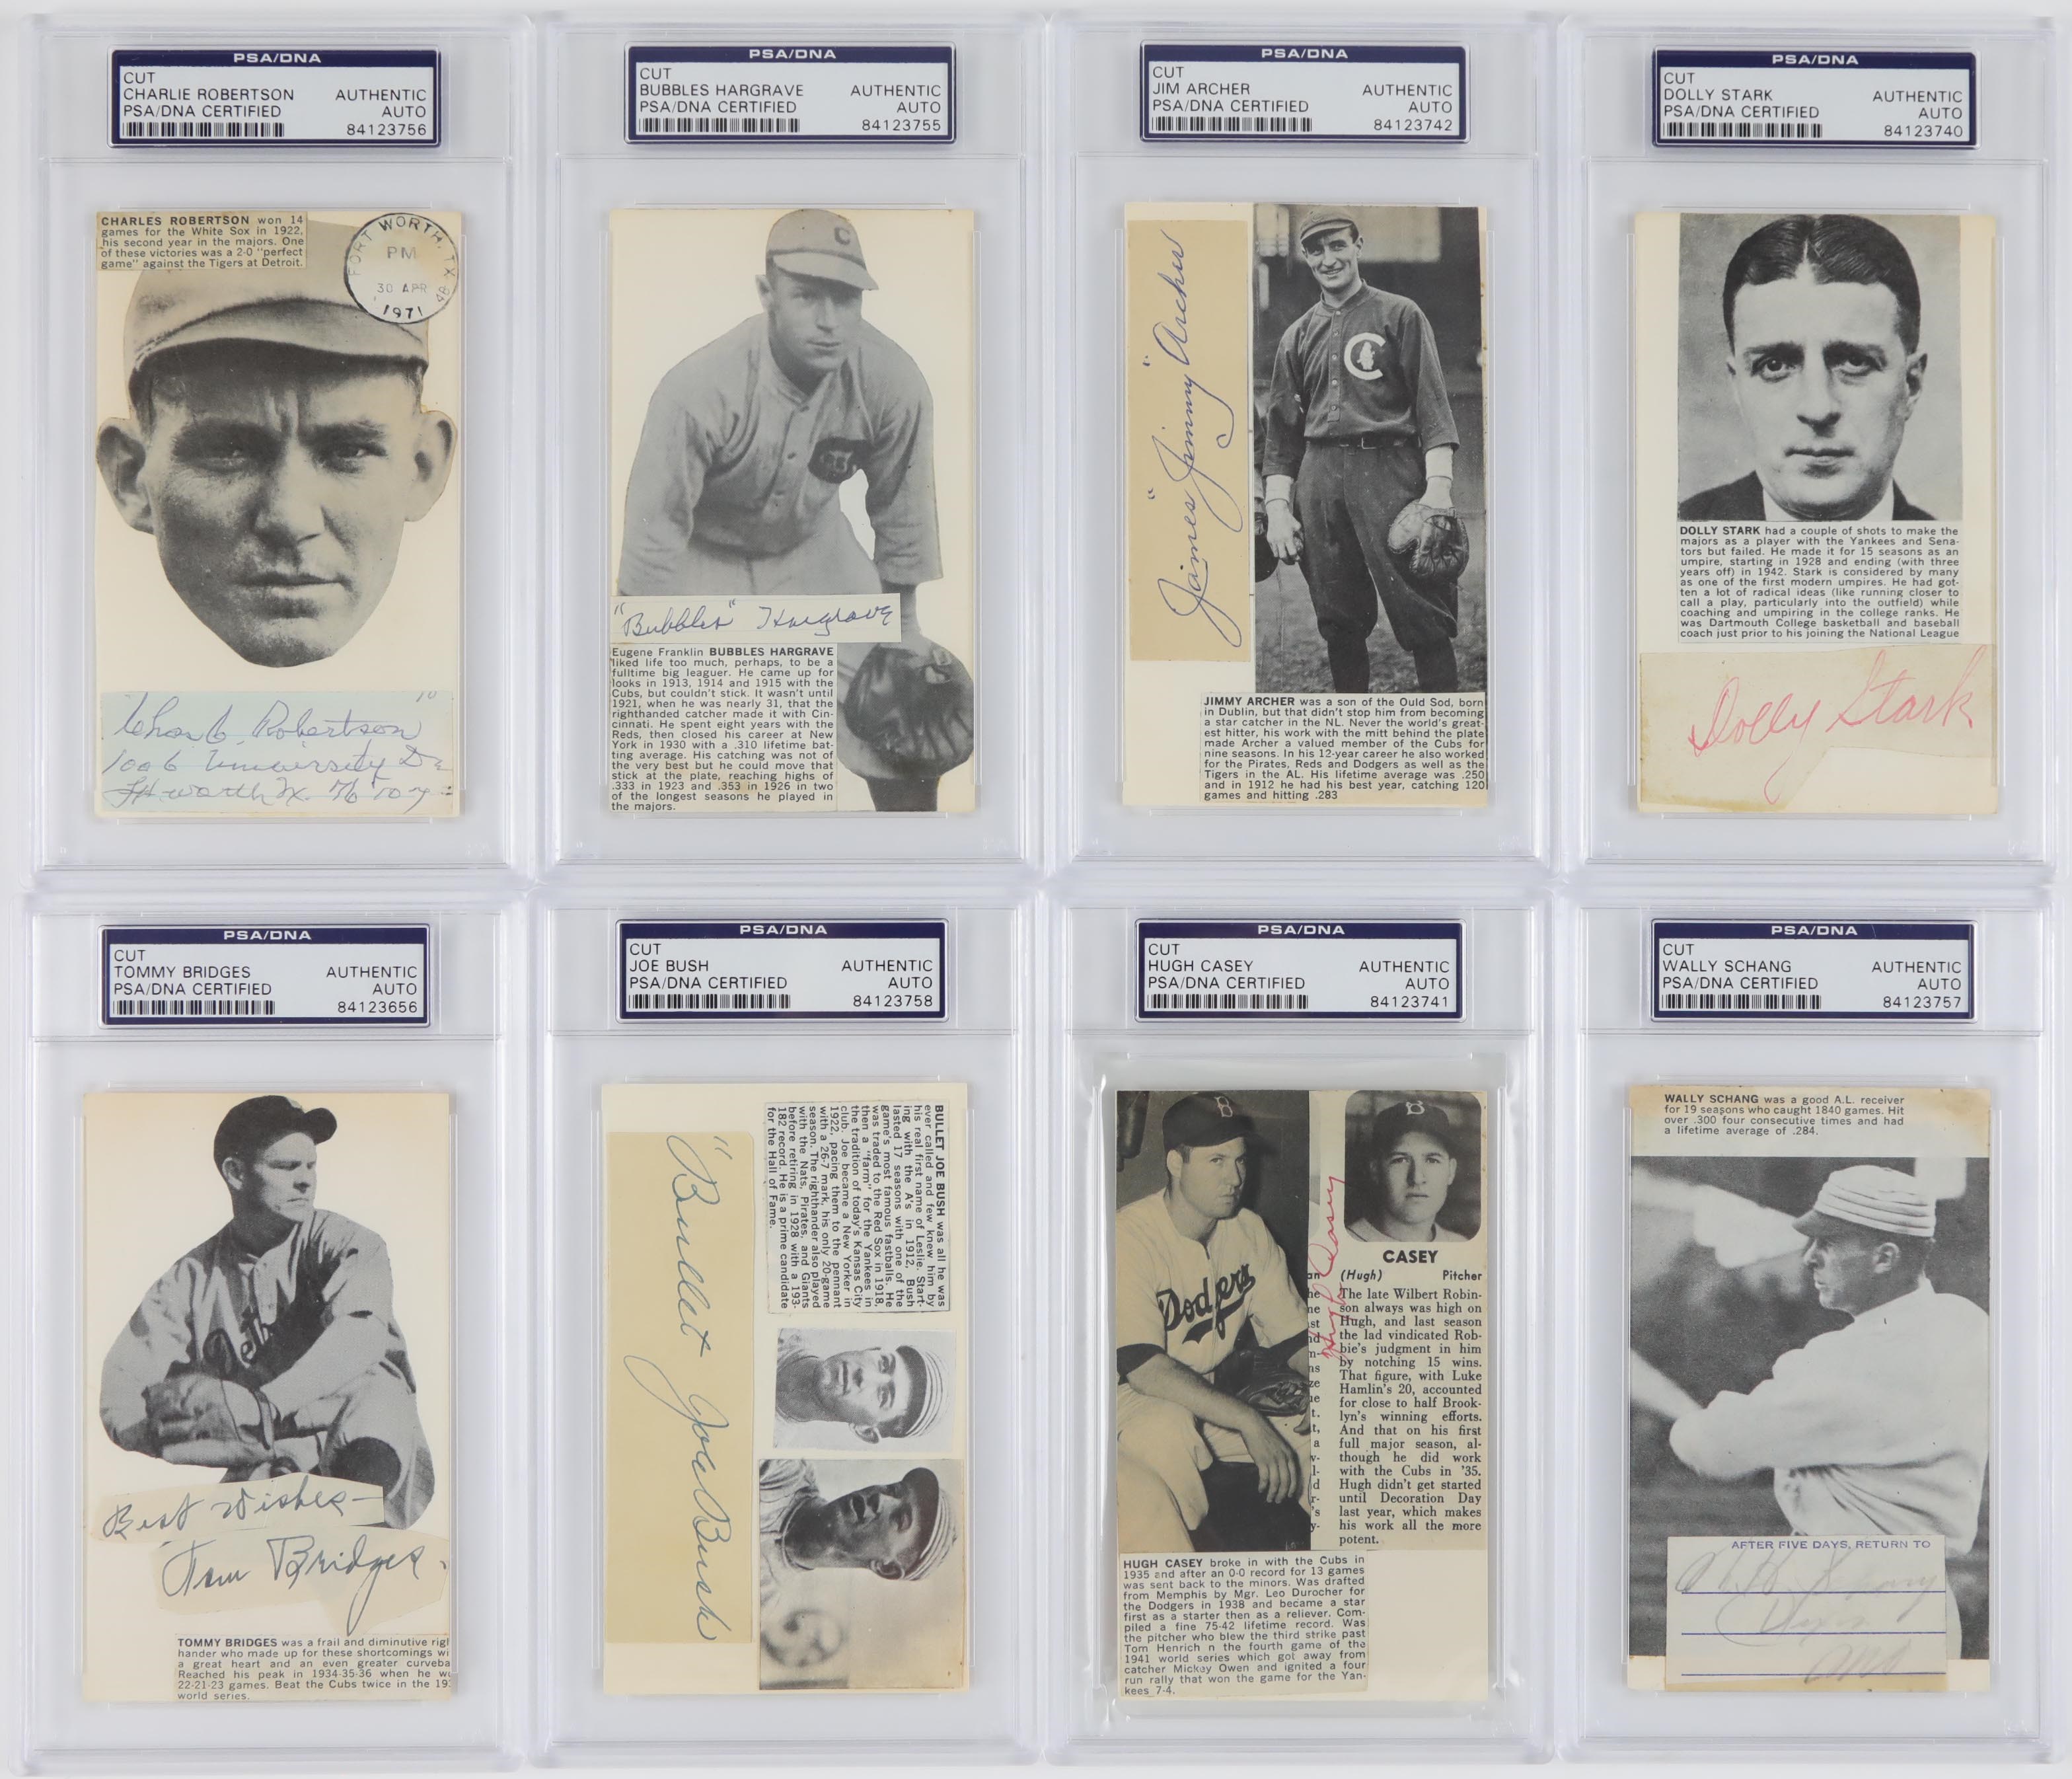 Baseball Autographs - Colossal Signed Index Card Archive with Obscure Rarities (3,400+)